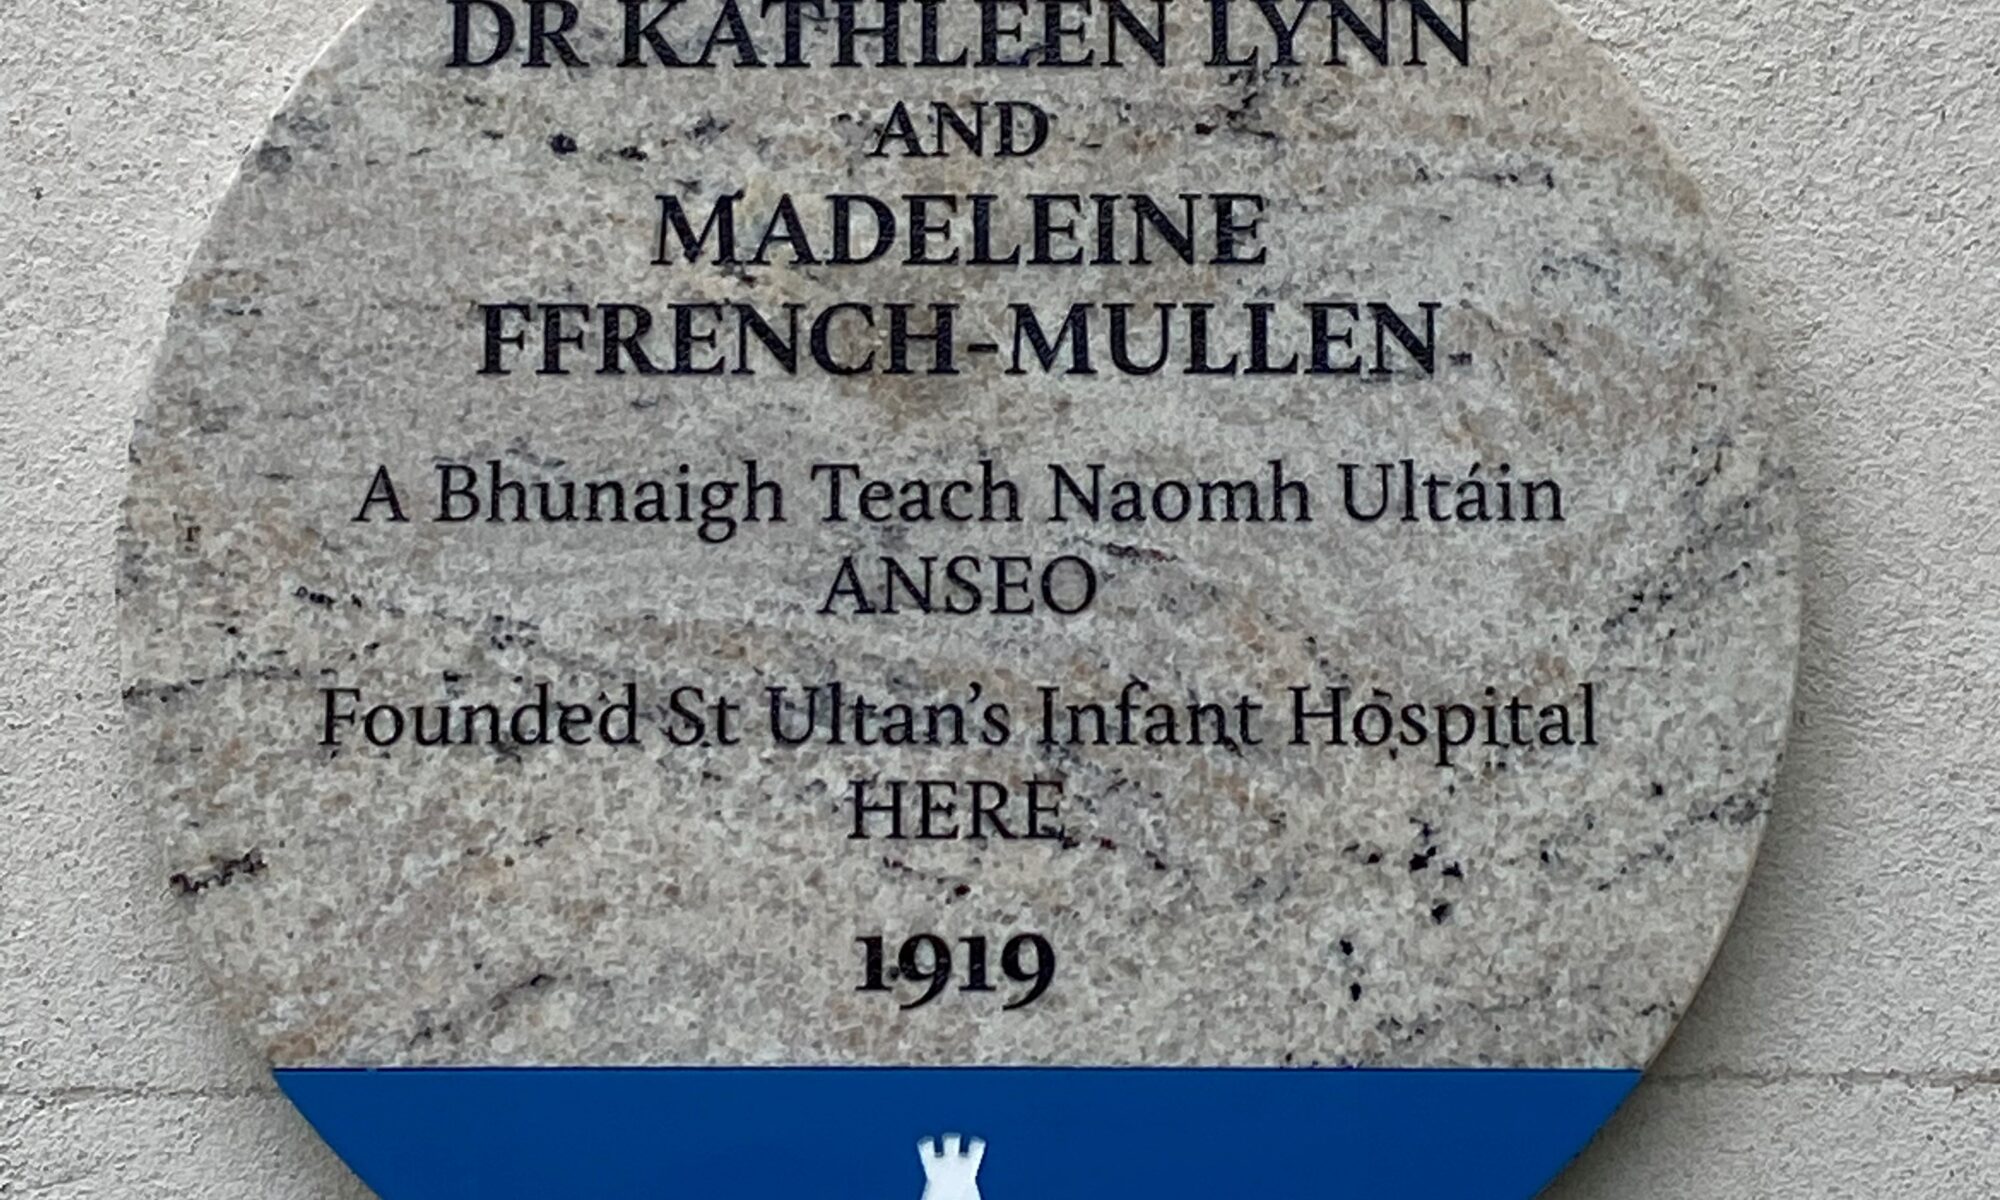 Photograph of Dublin City Council Commemorative Plaque honouring Kathleen Lynn and Madeleine ffrench-Mullen.